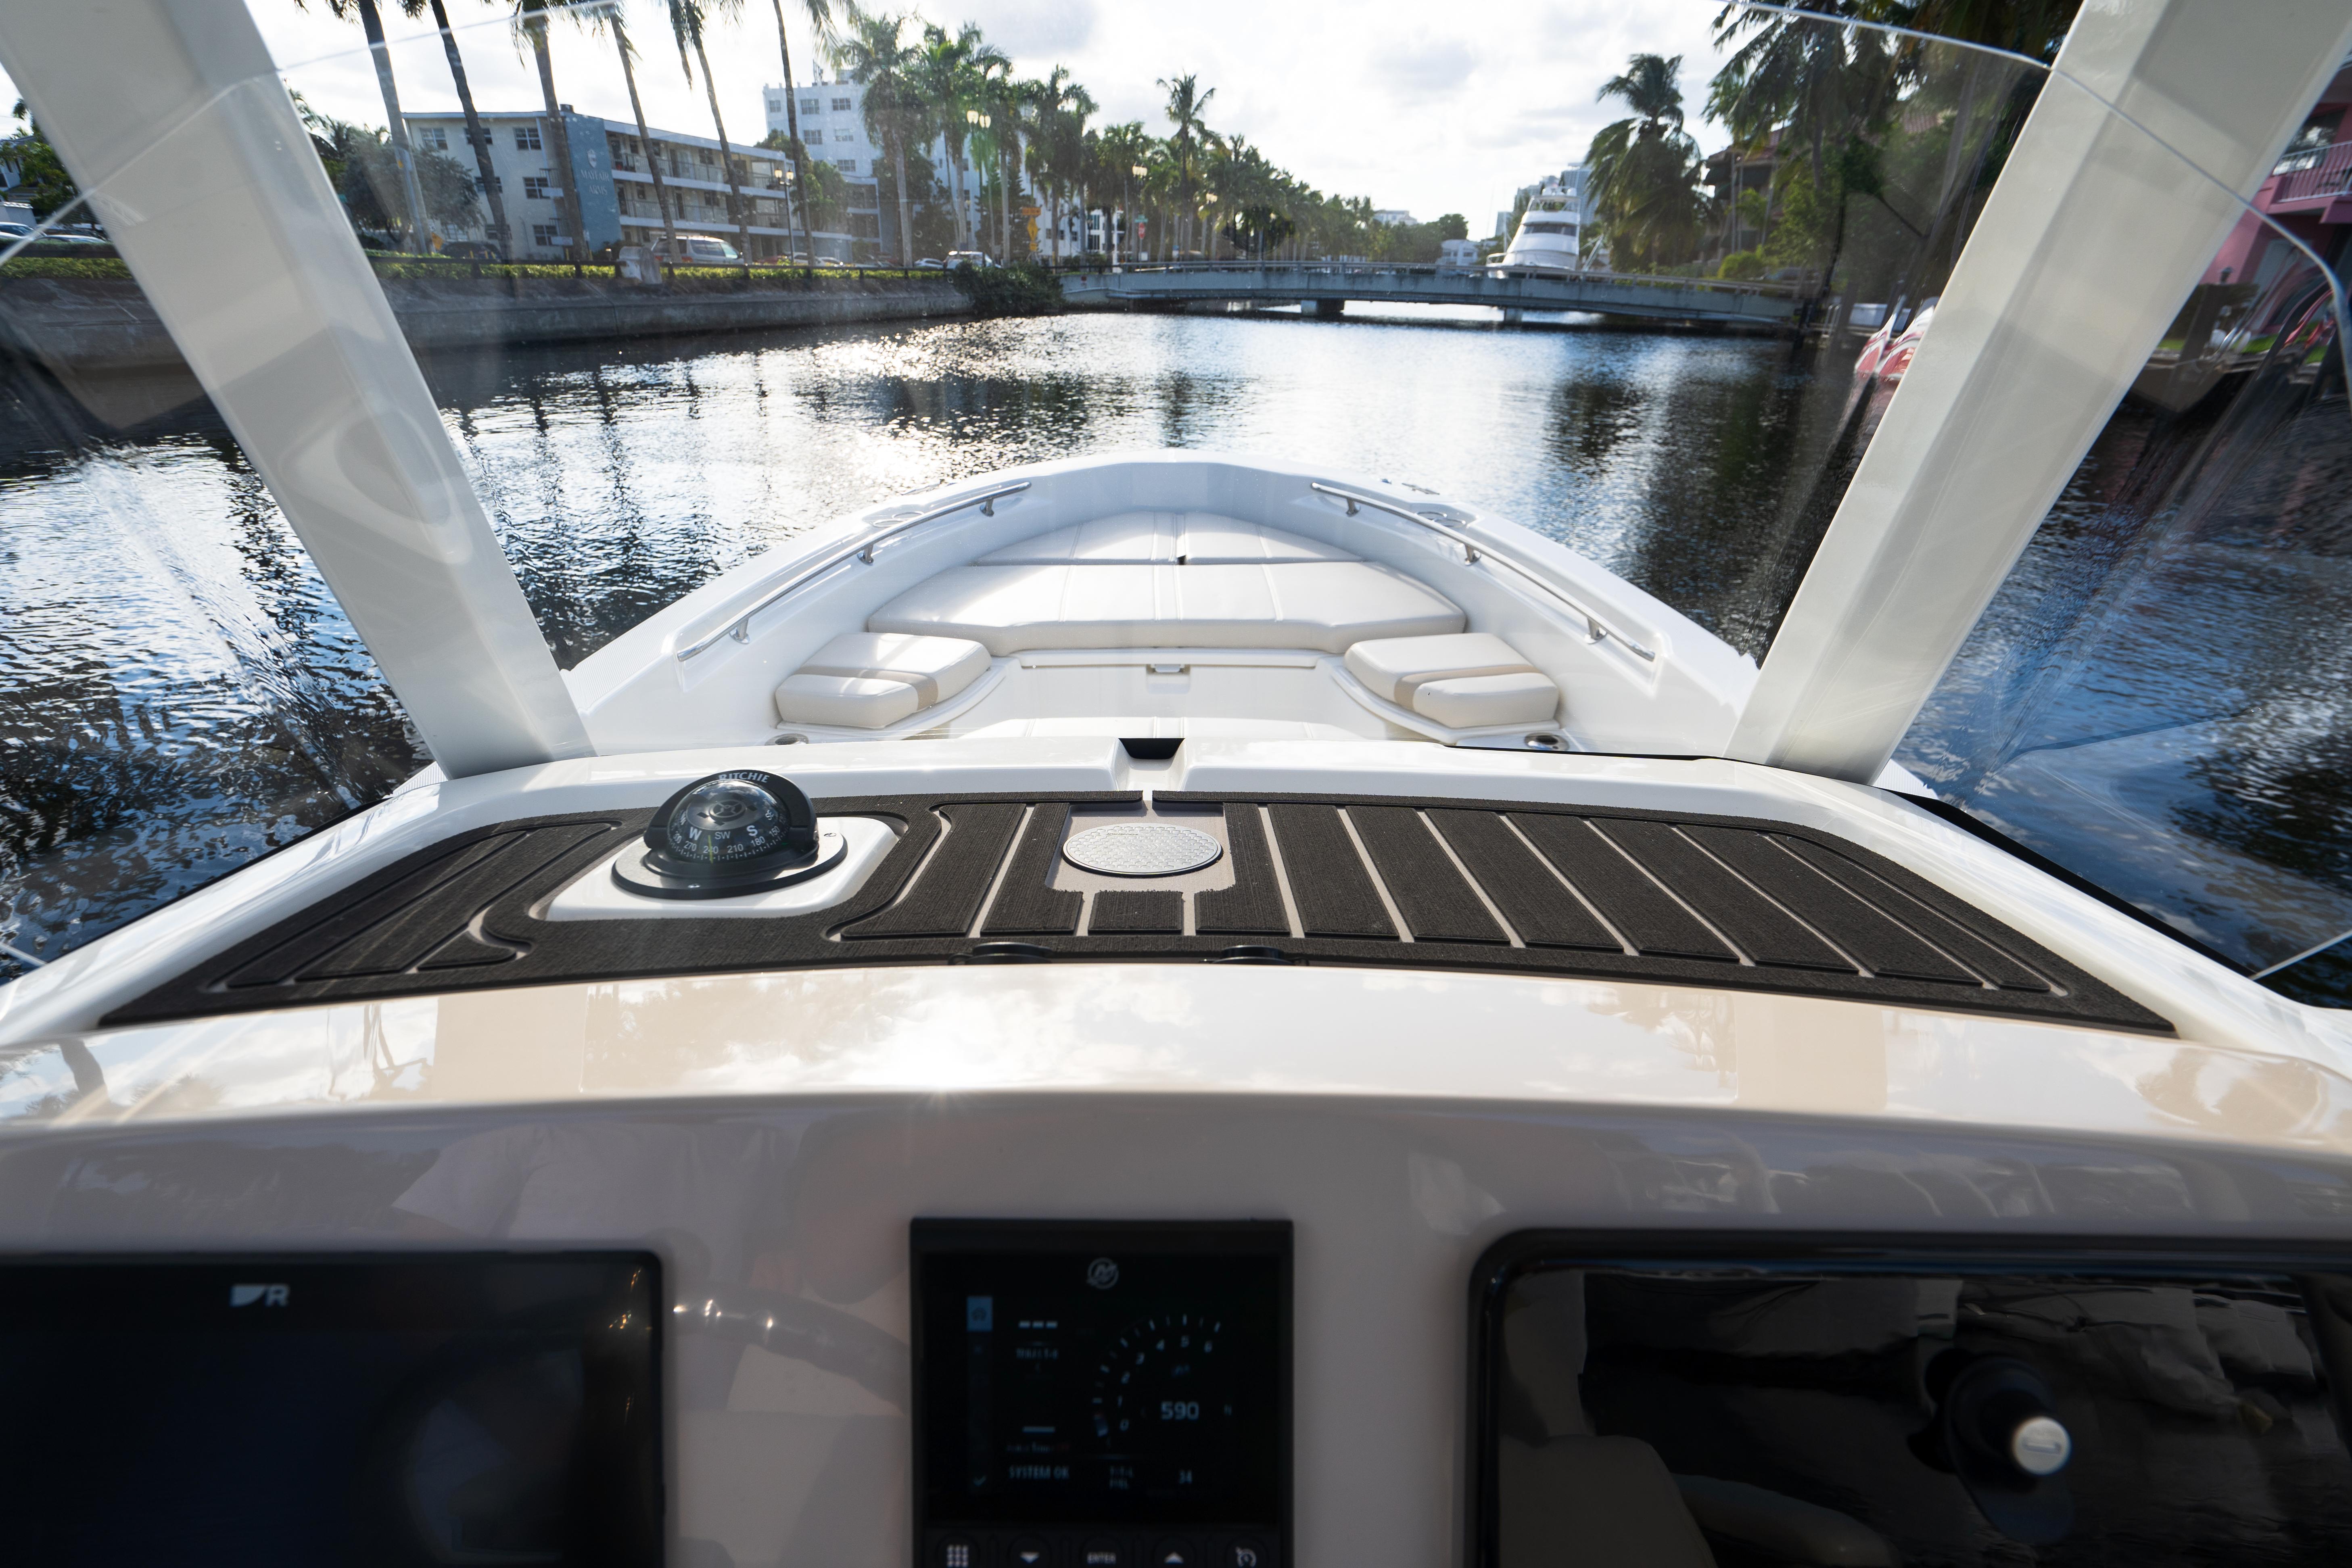 Boston Whaler 25' - Compass and Wireless Charging Pad